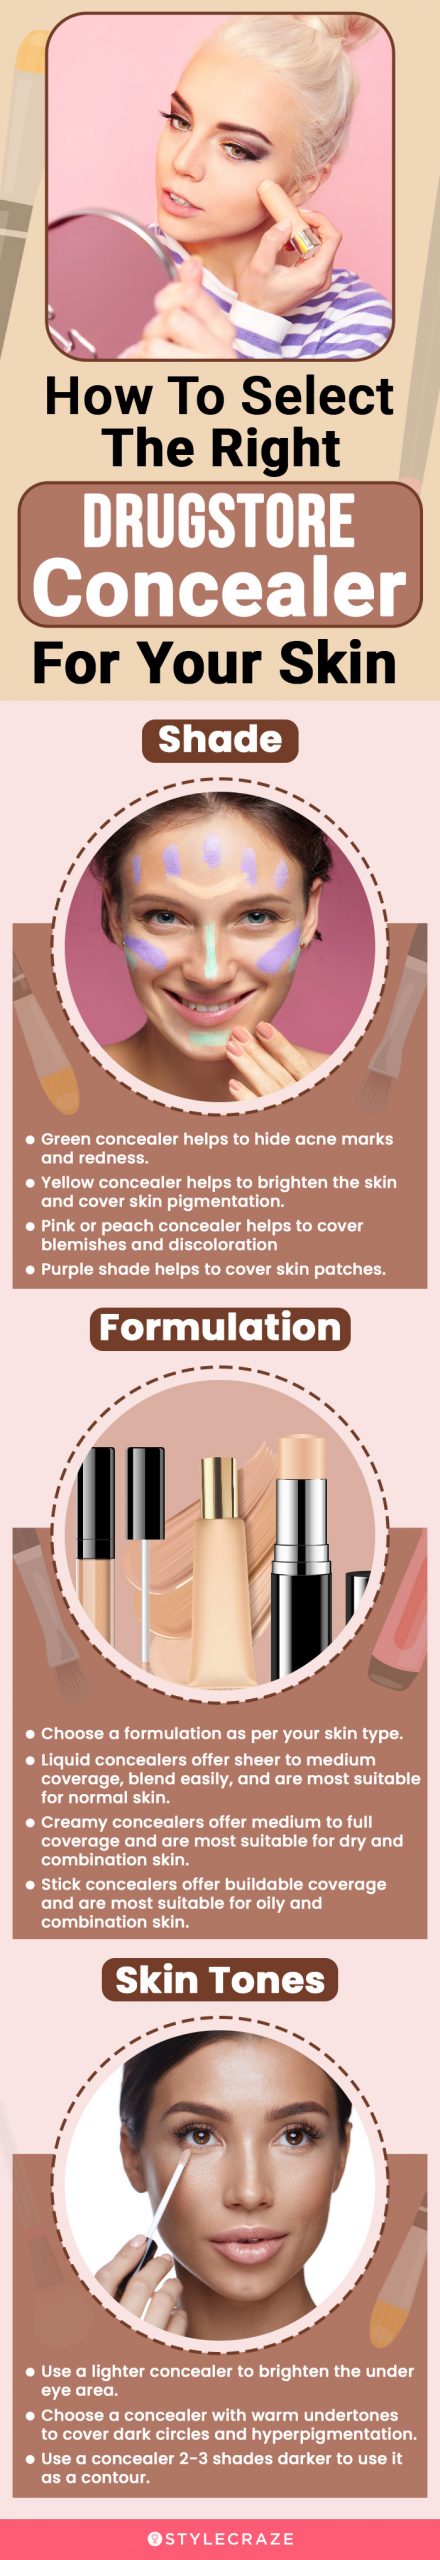 How To Select The Right Drugstore Concealer For Your Skin (infographic)